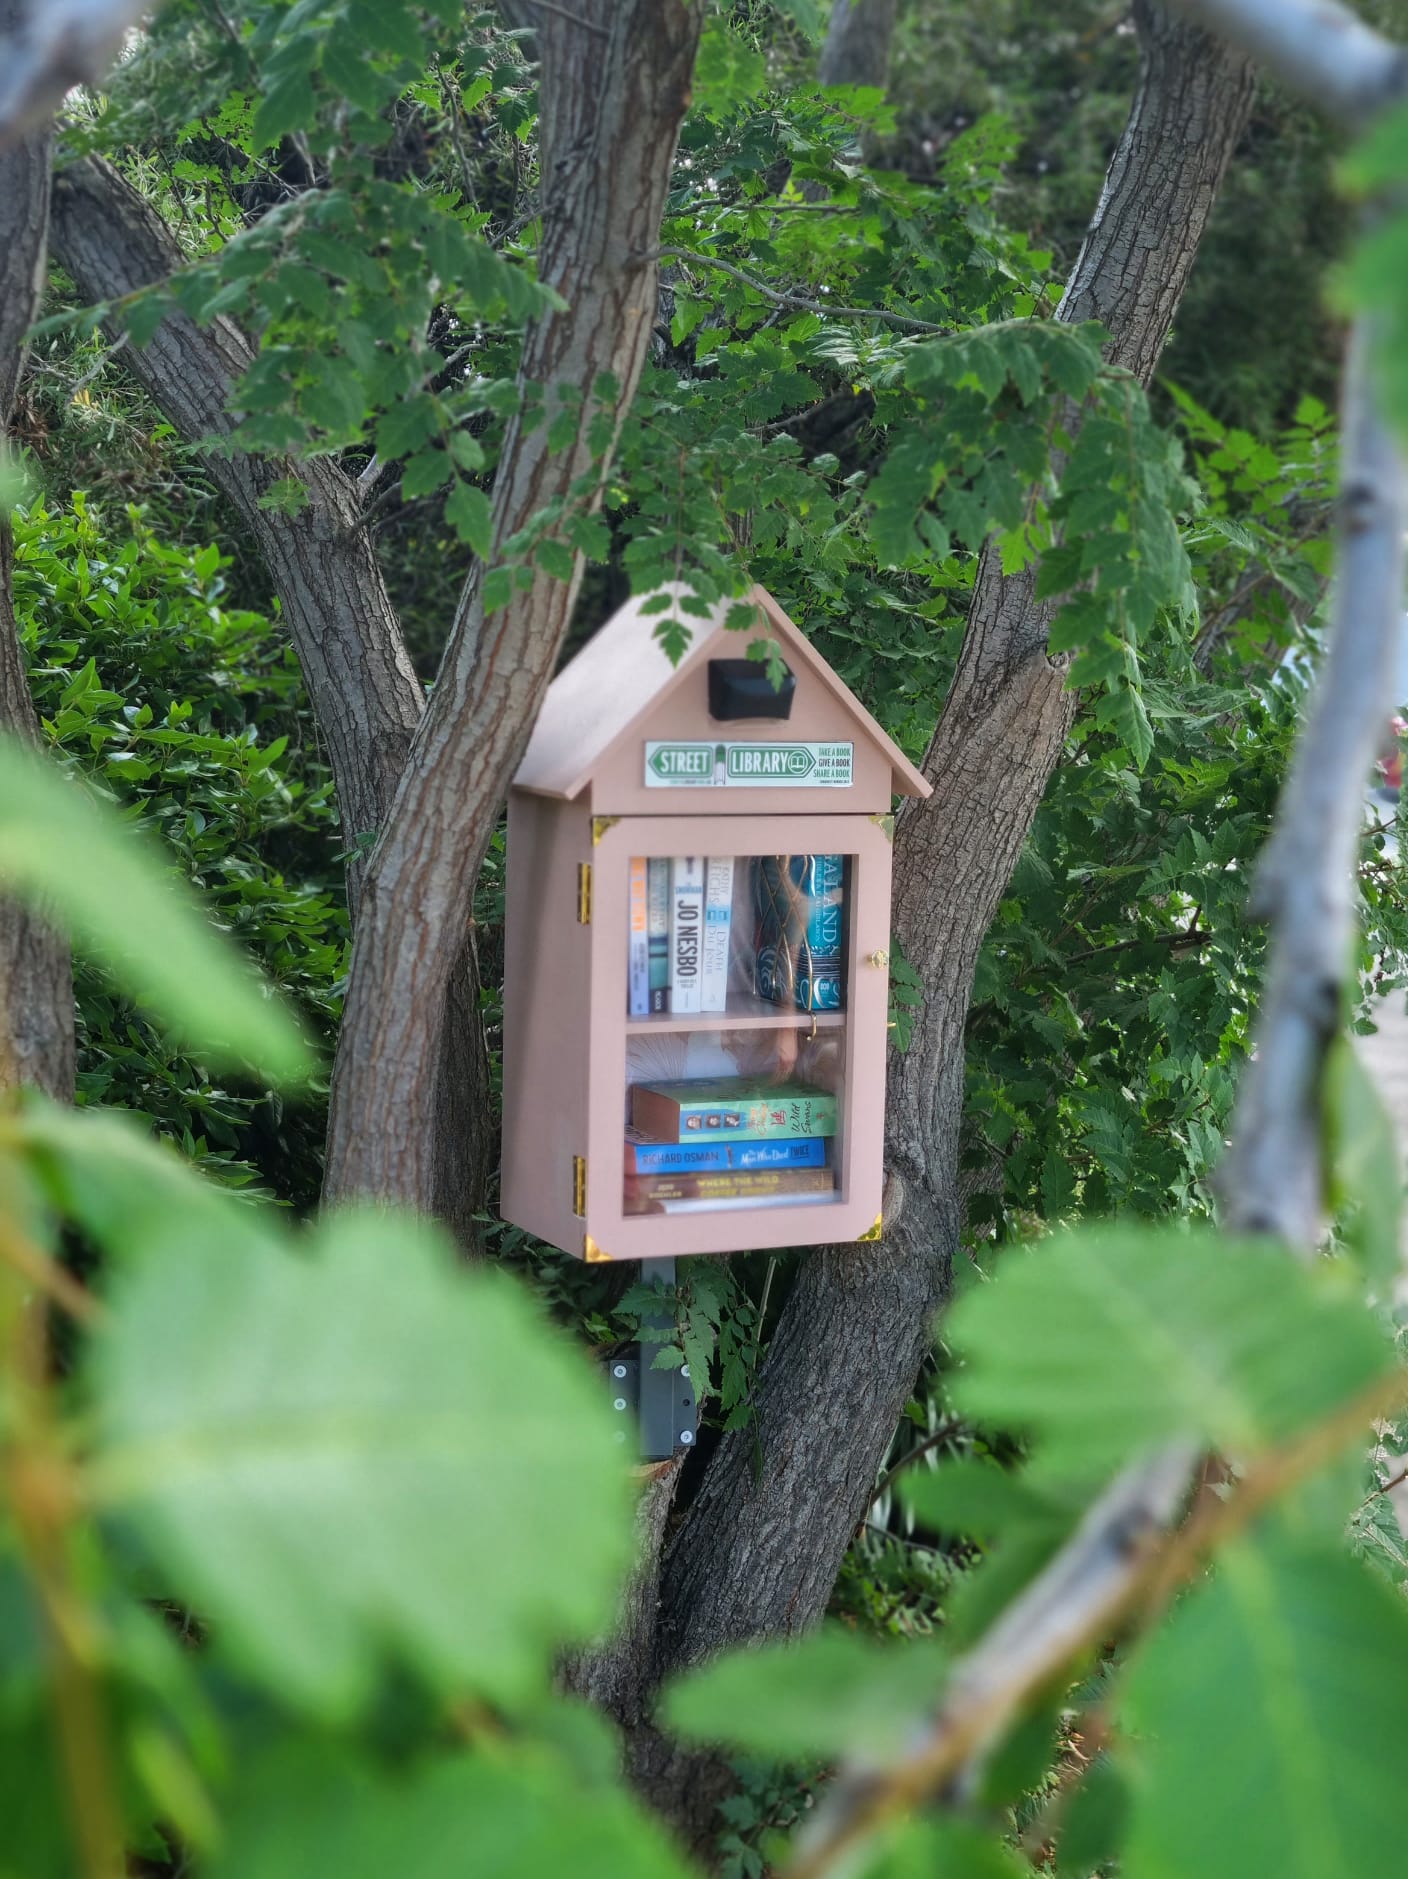 A pink Street Library nestled in the branches of a tree